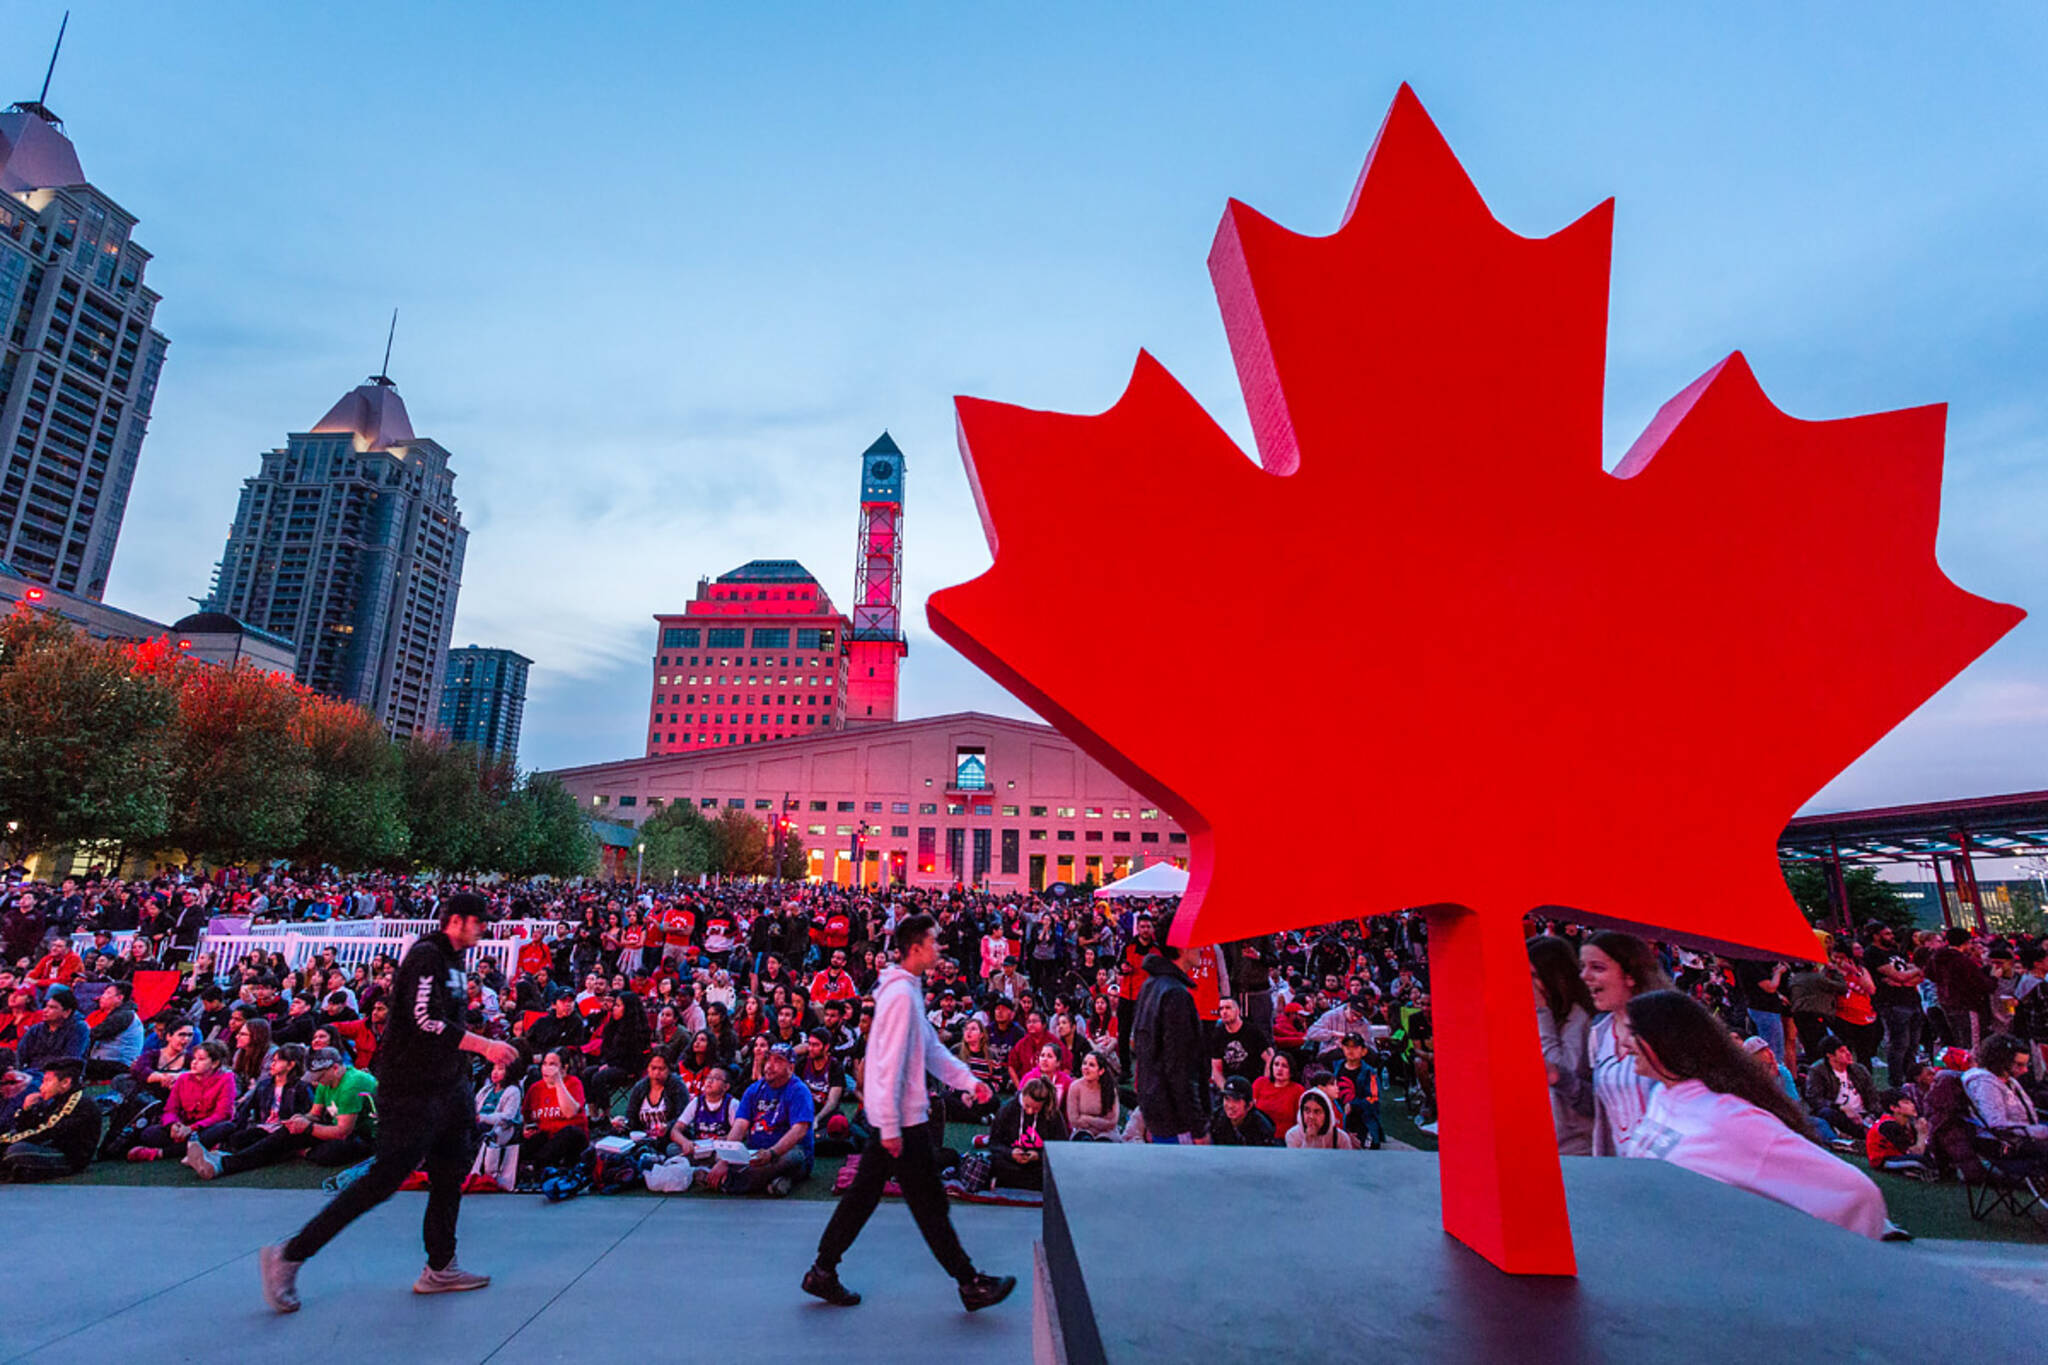 Canada's population could nearly double over the next 50 years